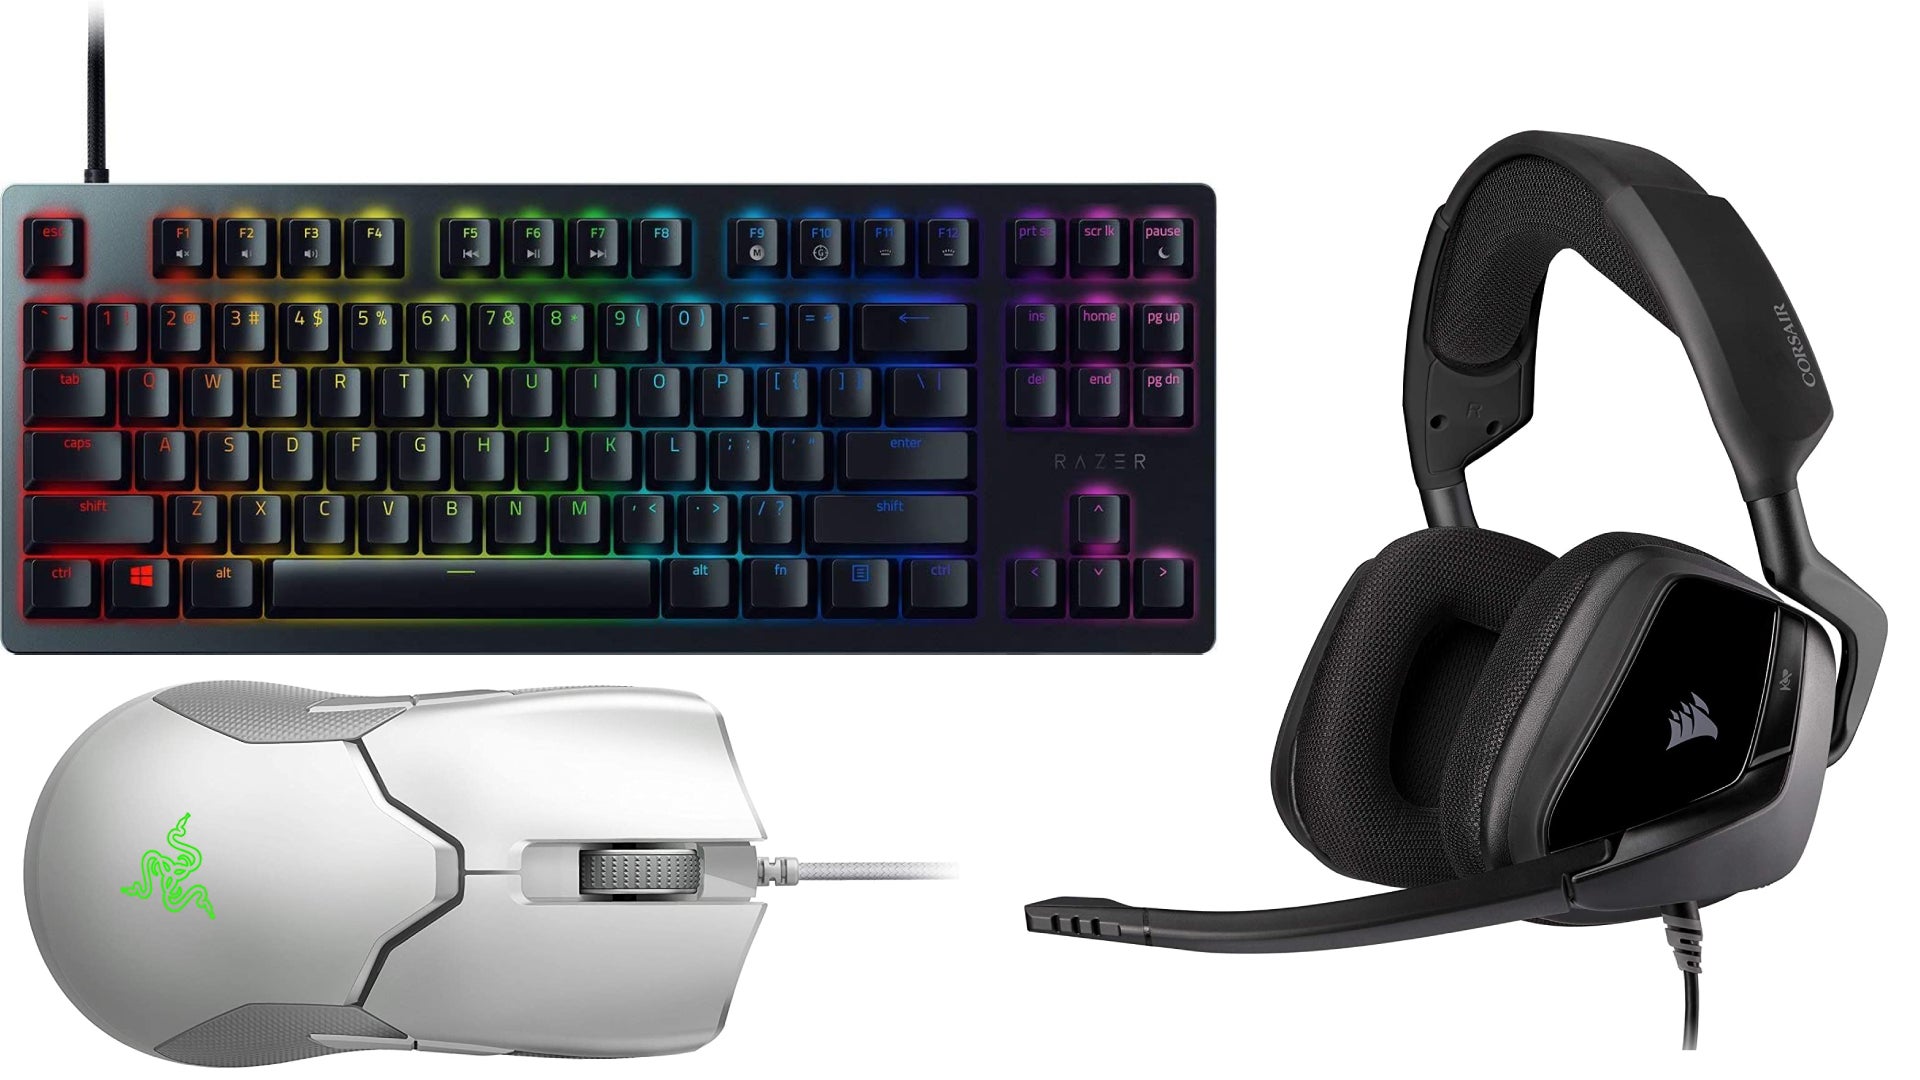 Image for Save an extra 20% on discounted gaming Accessories at Amazon Warehouse